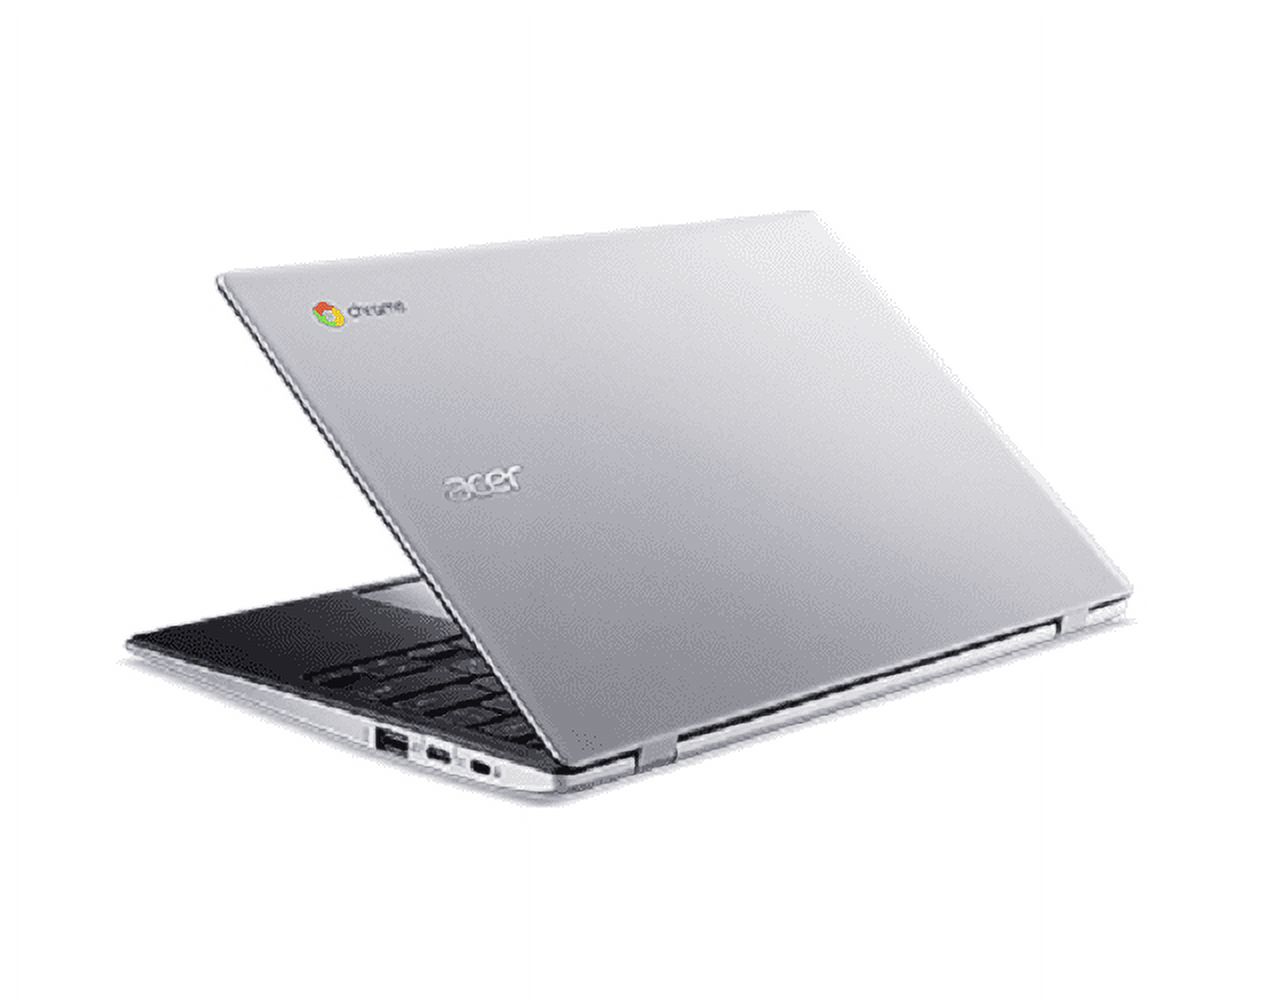 Restored Acer CB311-9H-C4XC Chromebook Spin 311 11.6" HD Laptop Celeron N4020 1.1GHZ UHD Graphics 600 4GB RAM 32GB SSD Pure Silver Chrome OS (Refurbished) - image 1 of 1